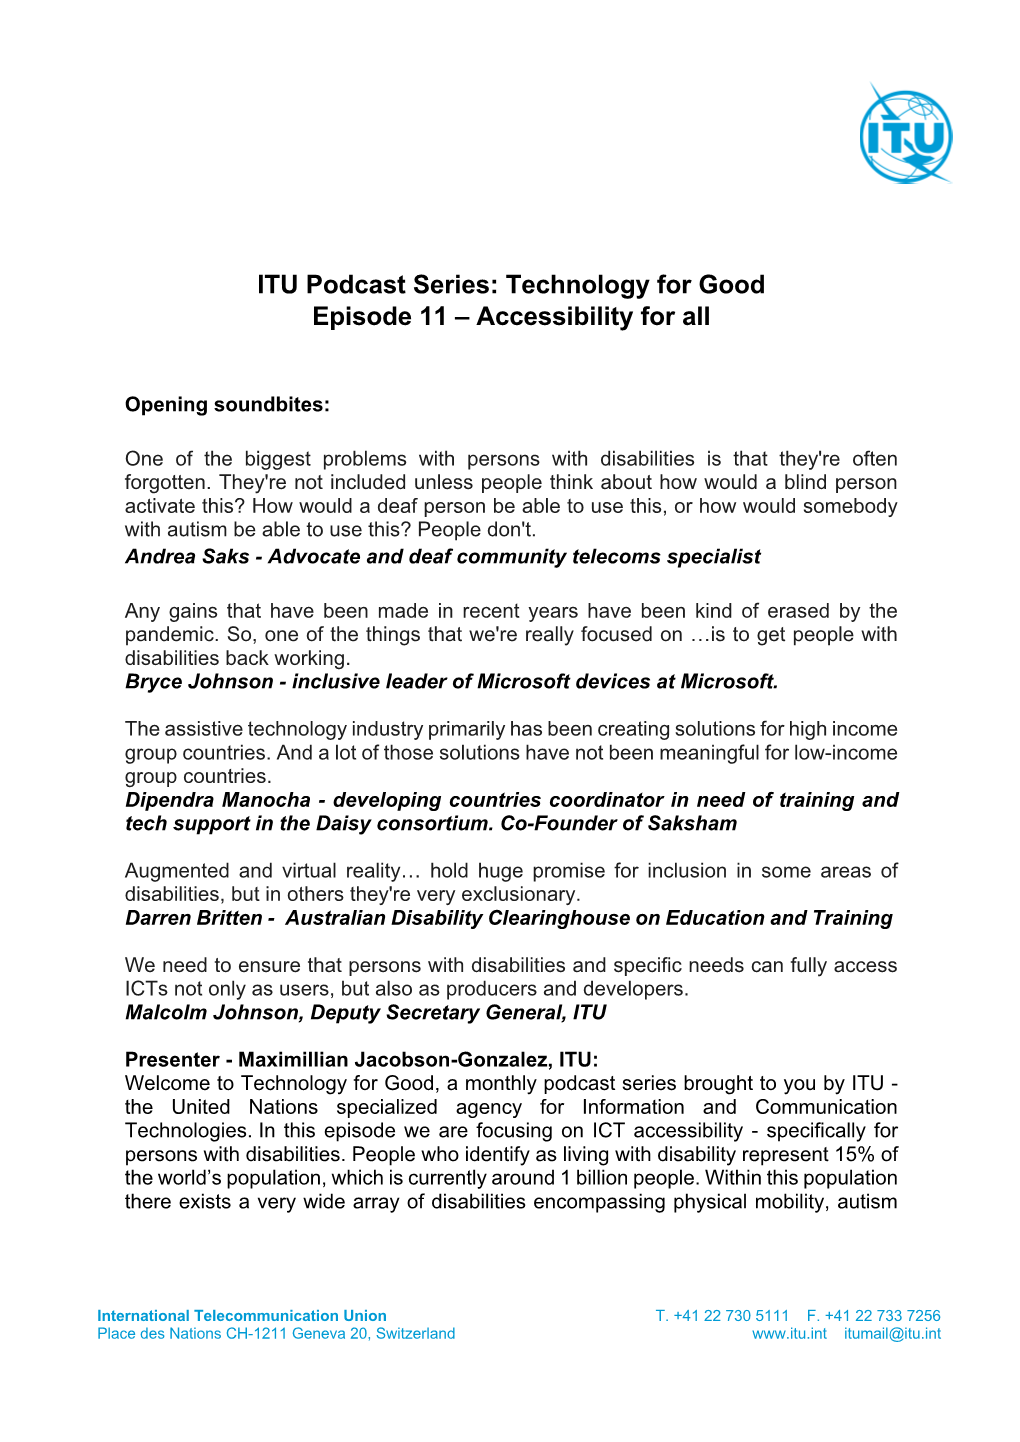 ITU Podcast Series Technology for Good Episode 11